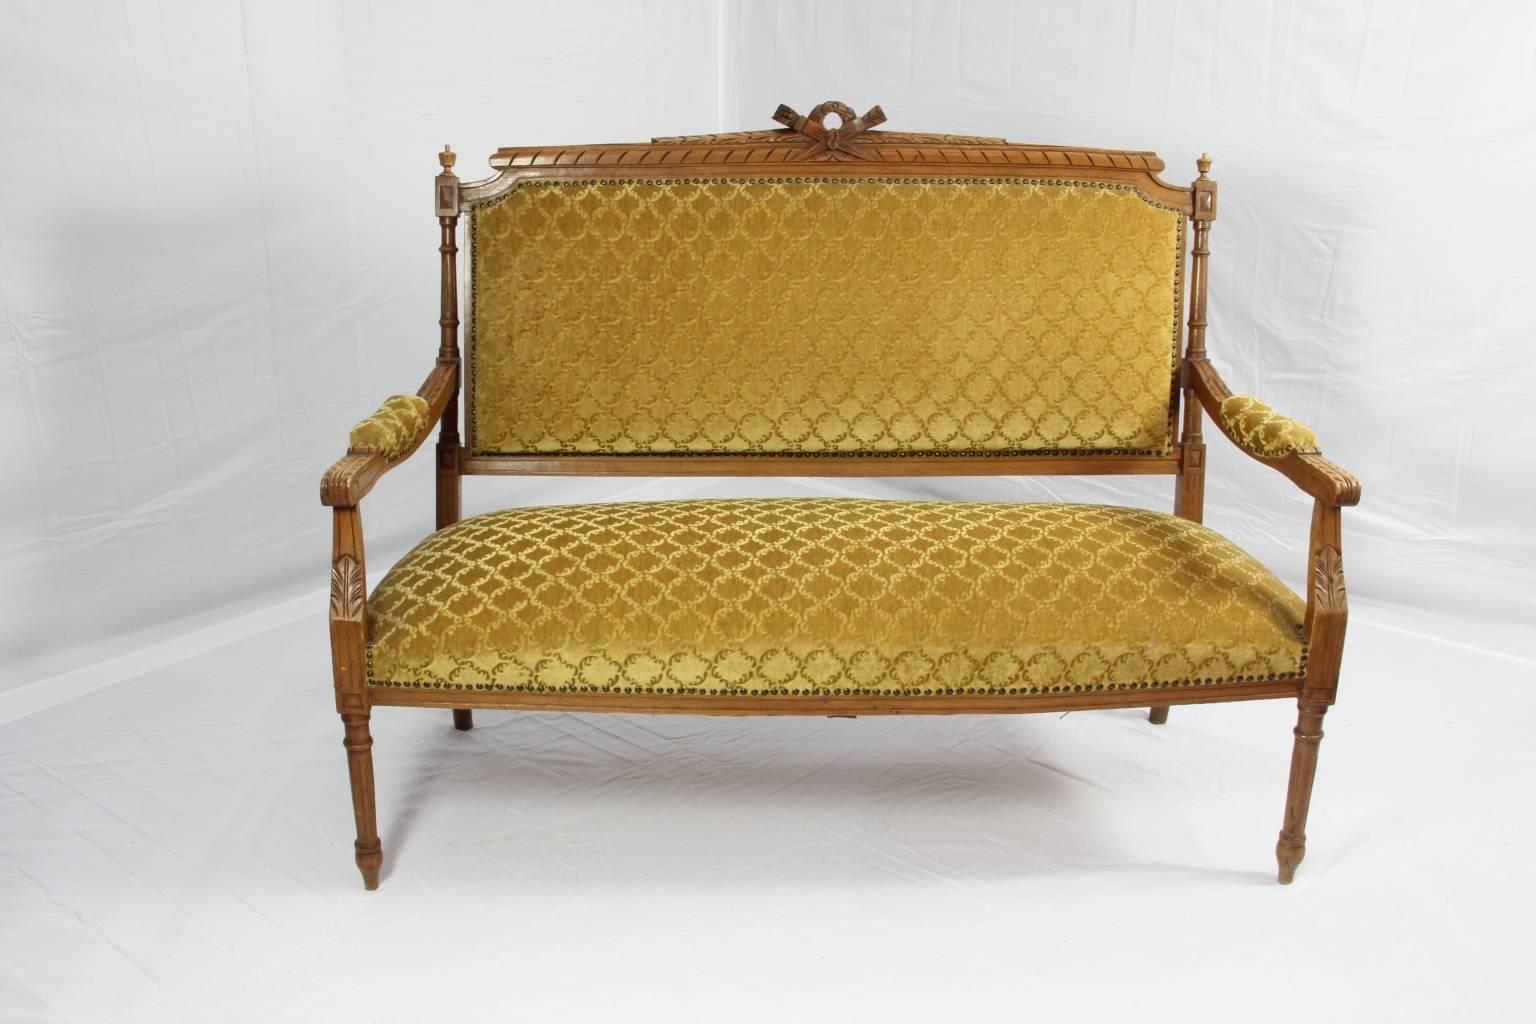 French settee of walnut with golden pressed velvet and brass tacking. The crest rail of this piece features a spiral carving giving the look of a rope tied in a bow in the center, flanked on both sides by acorn finials. Chip carvings up the legs and